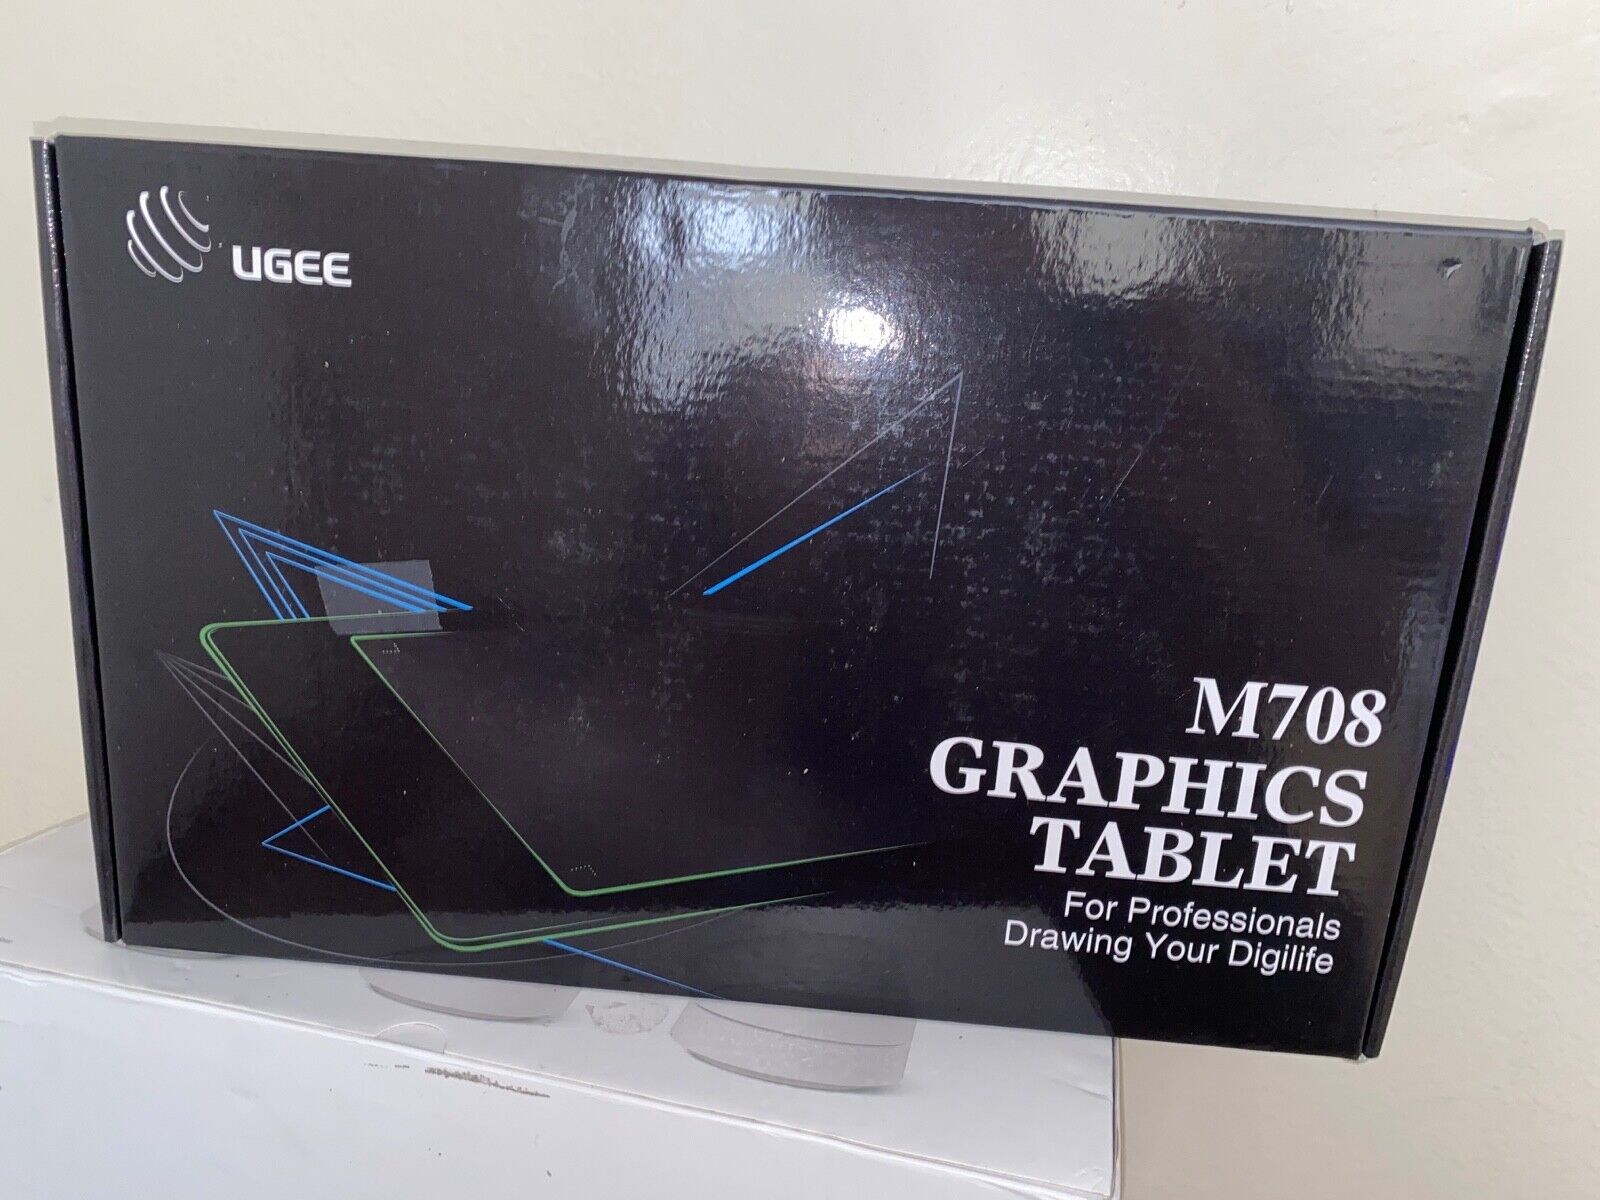 NEW UGEE M708 GRAPHICS TABLET FOR PROFESSIONALS DRAWING *